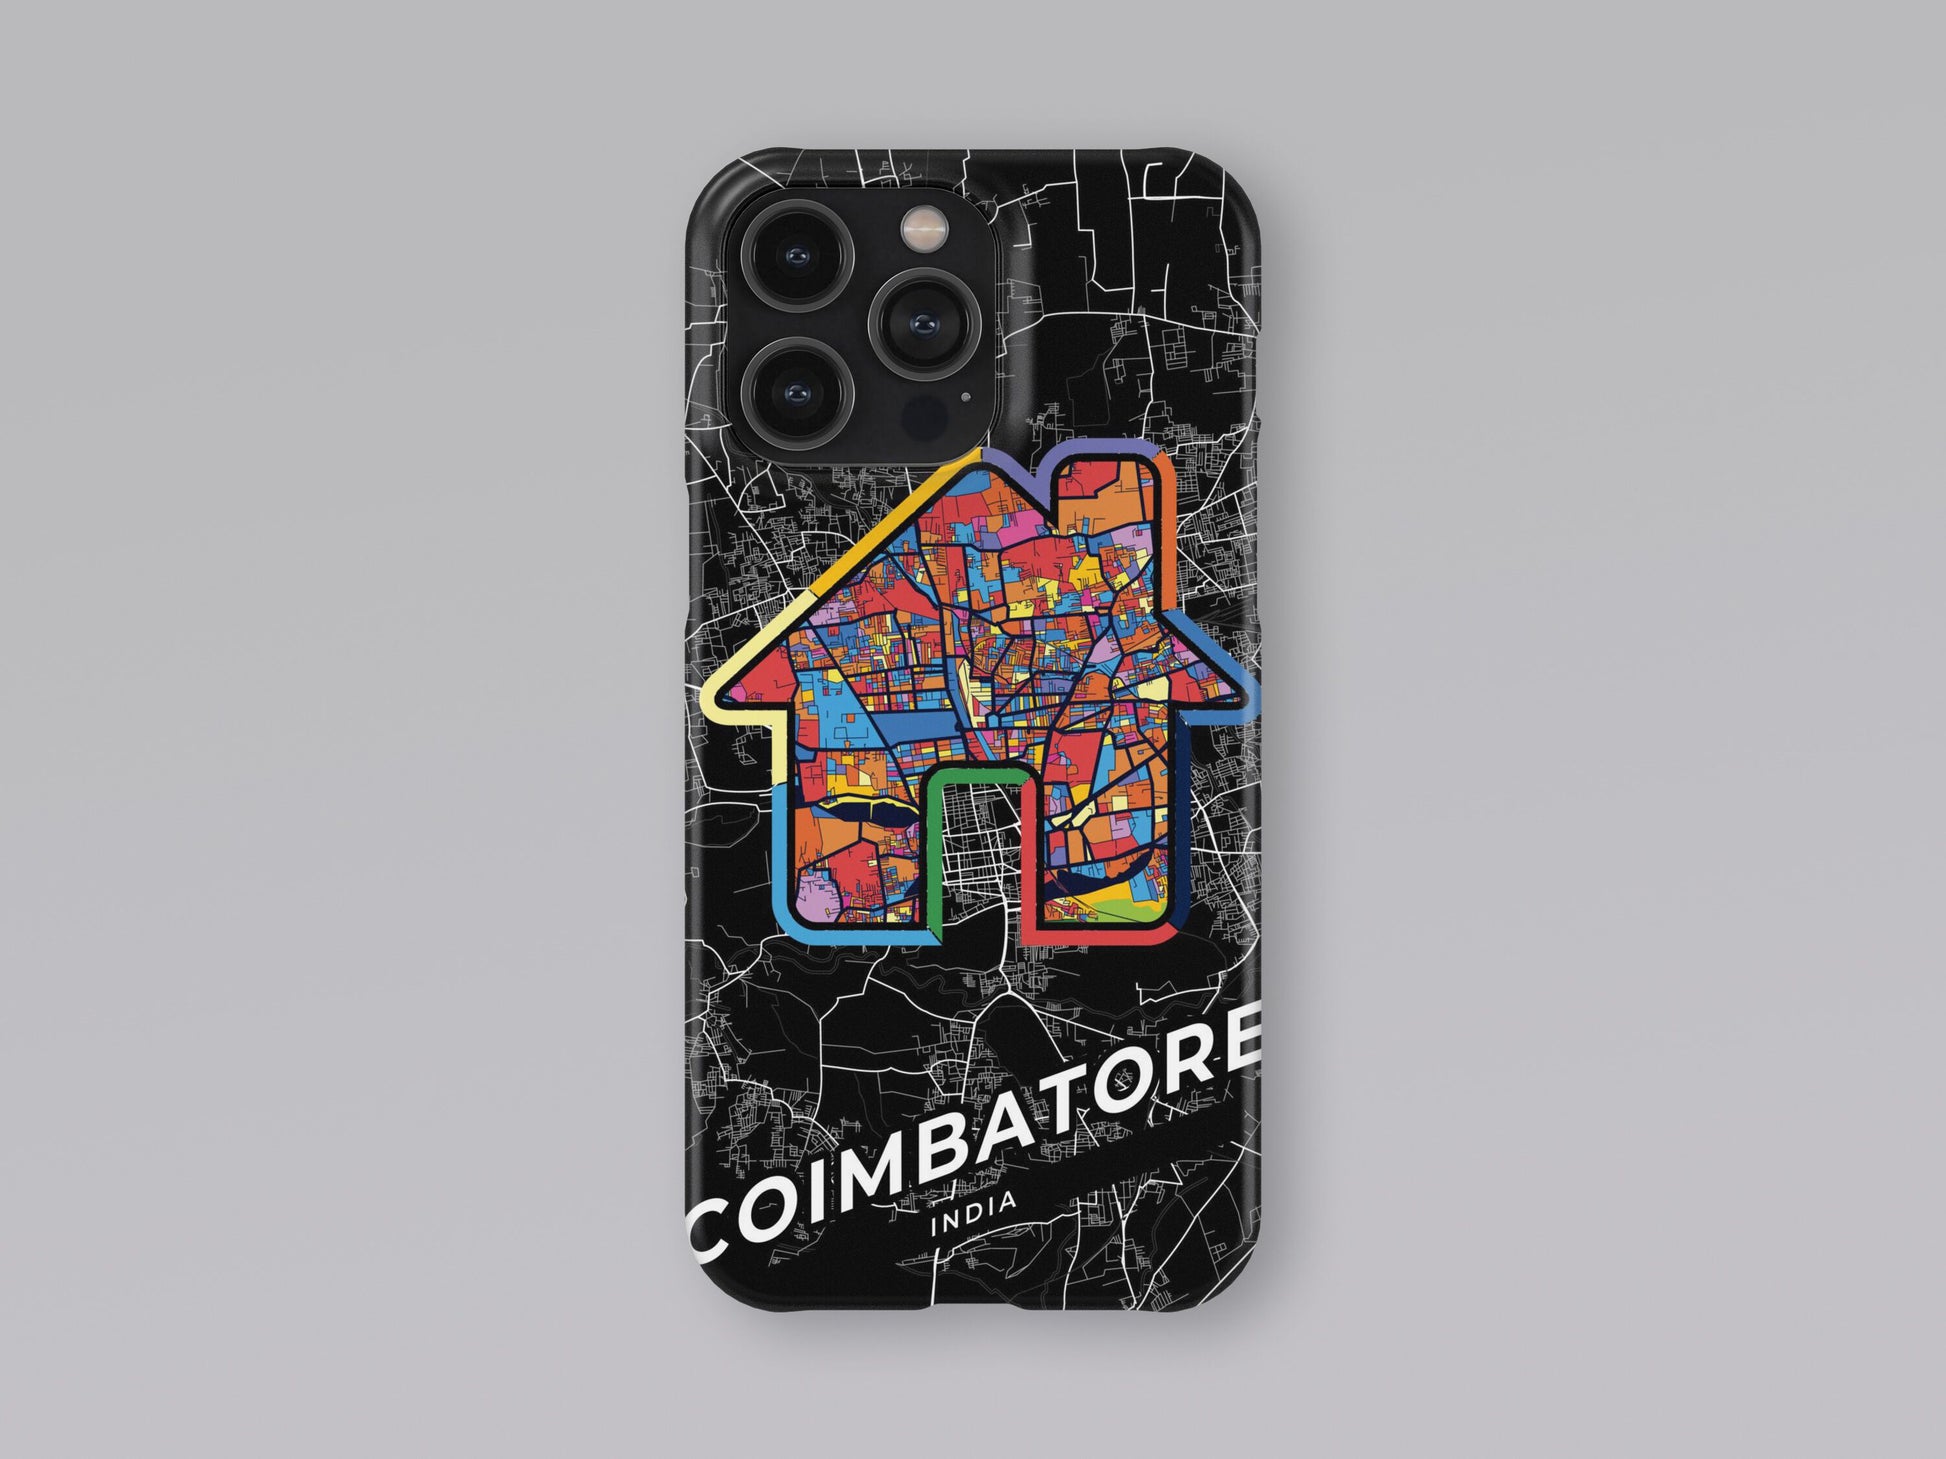 Coimbatore India slim phone case with colorful icon. Birthday, wedding or housewarming gift. Couple match cases. 3